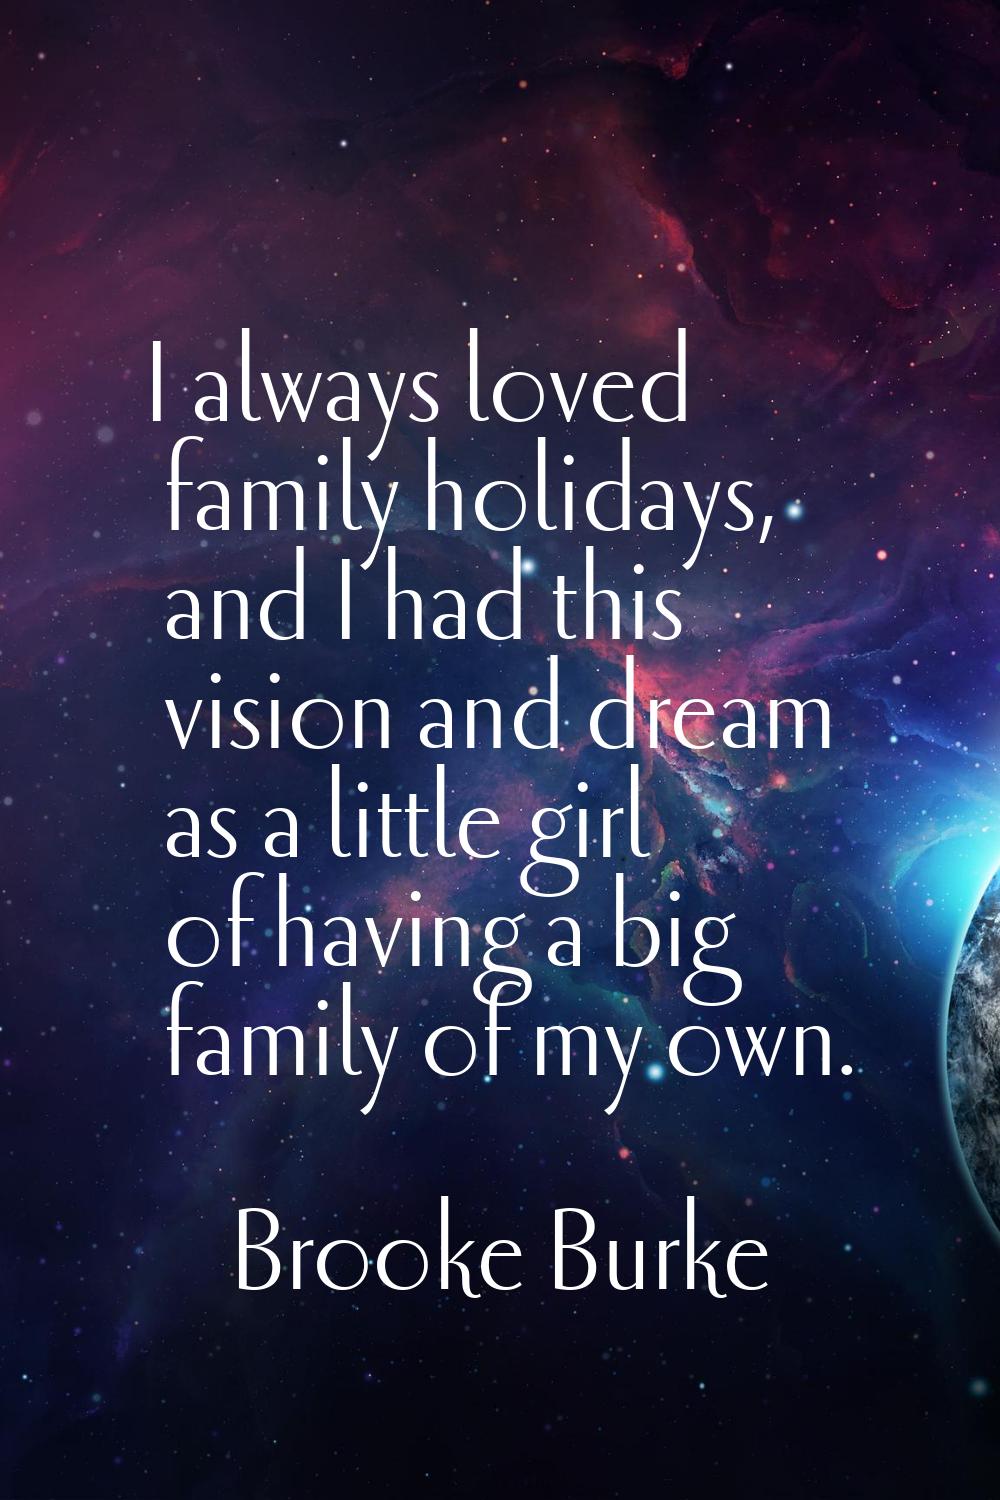 I always loved family holidays, and I had this vision and dream as a little girl of having a big fa